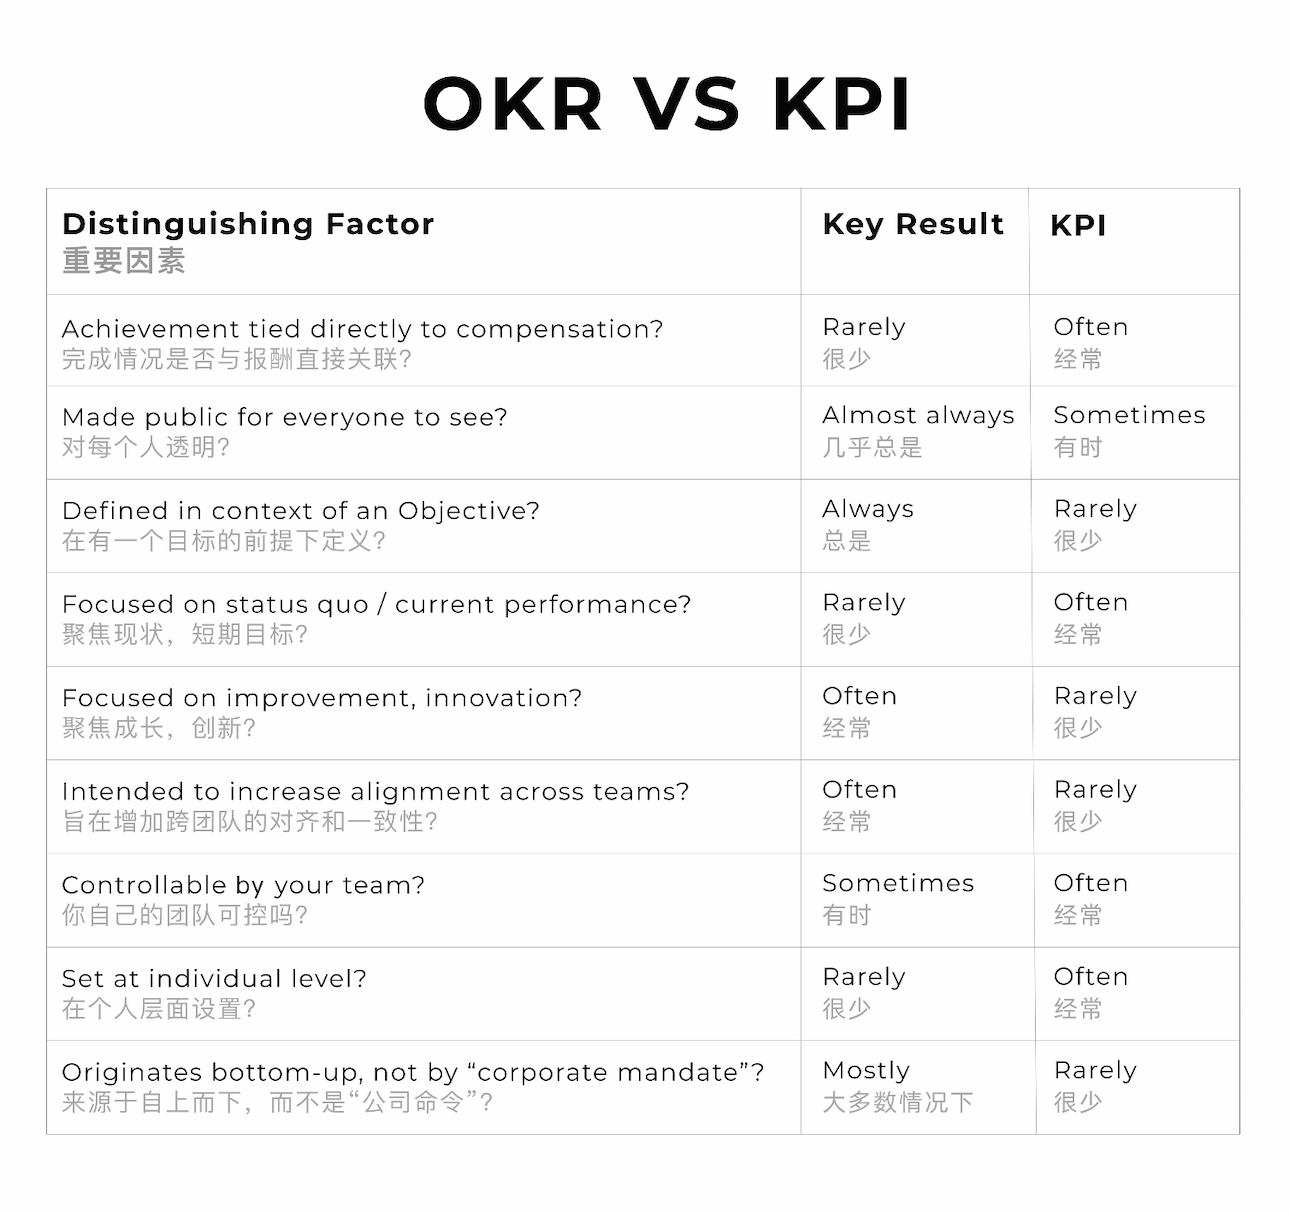 How to use OKR to achieve efficient performance management? 2